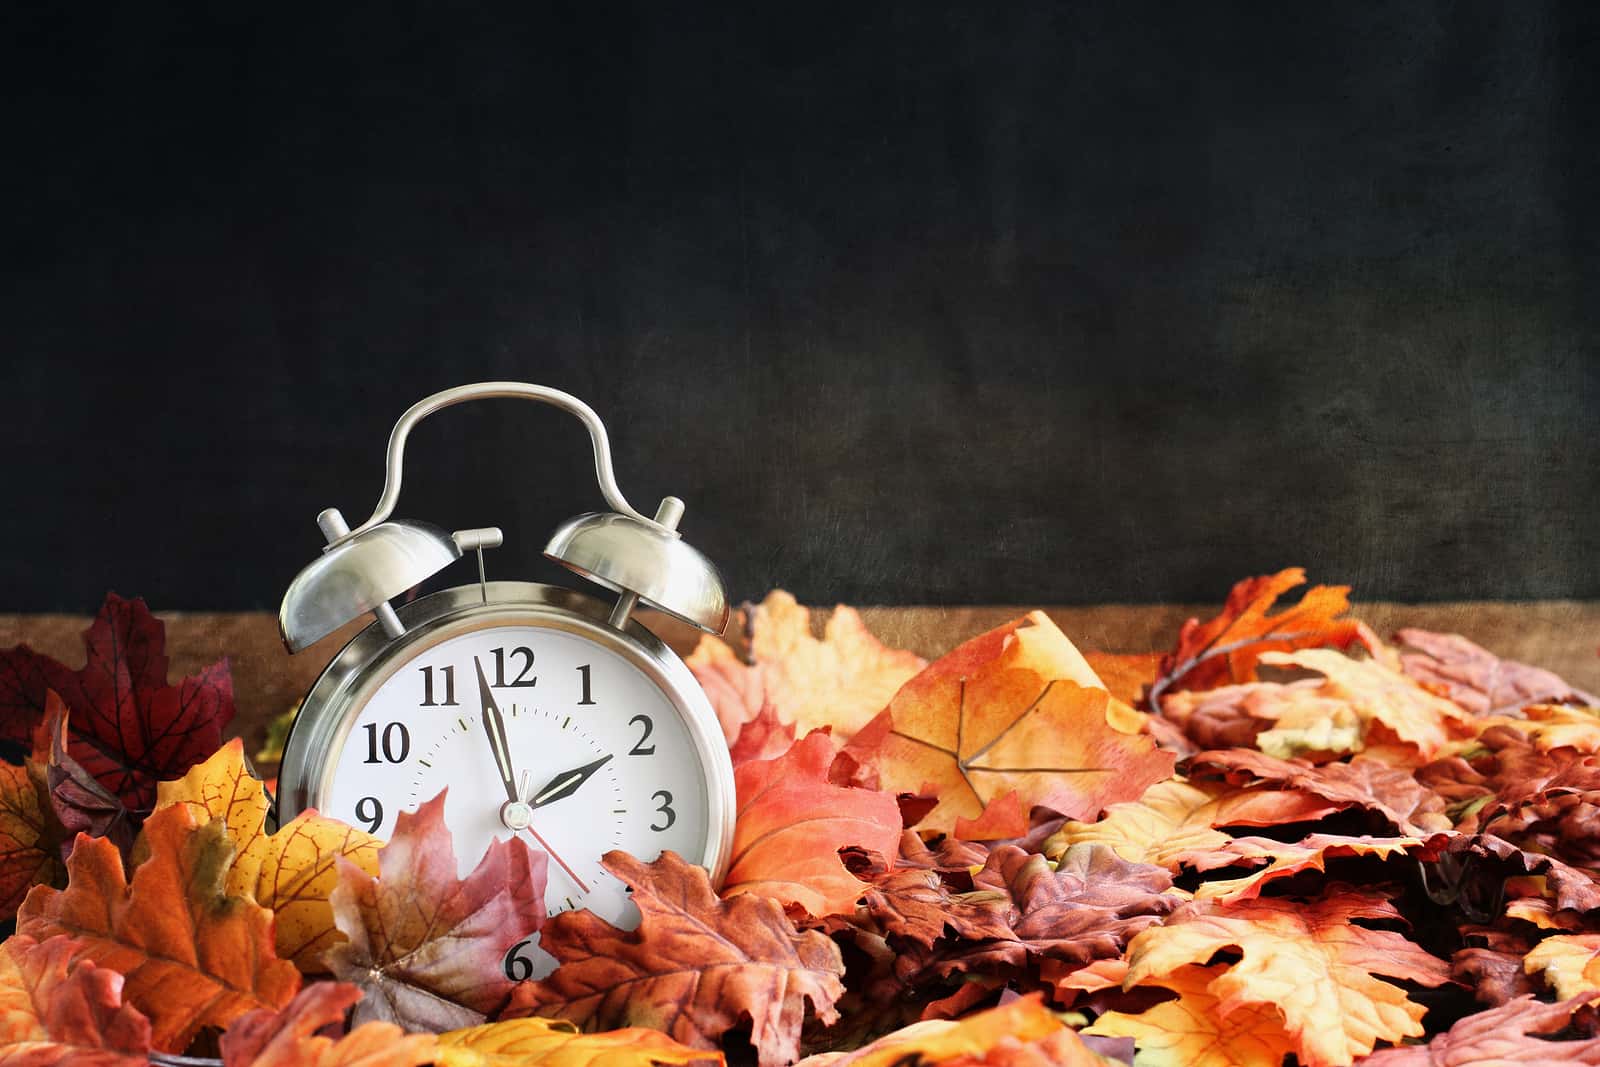 alarm-clock-in-colorful-autumn-leaves-against-a-dark-background